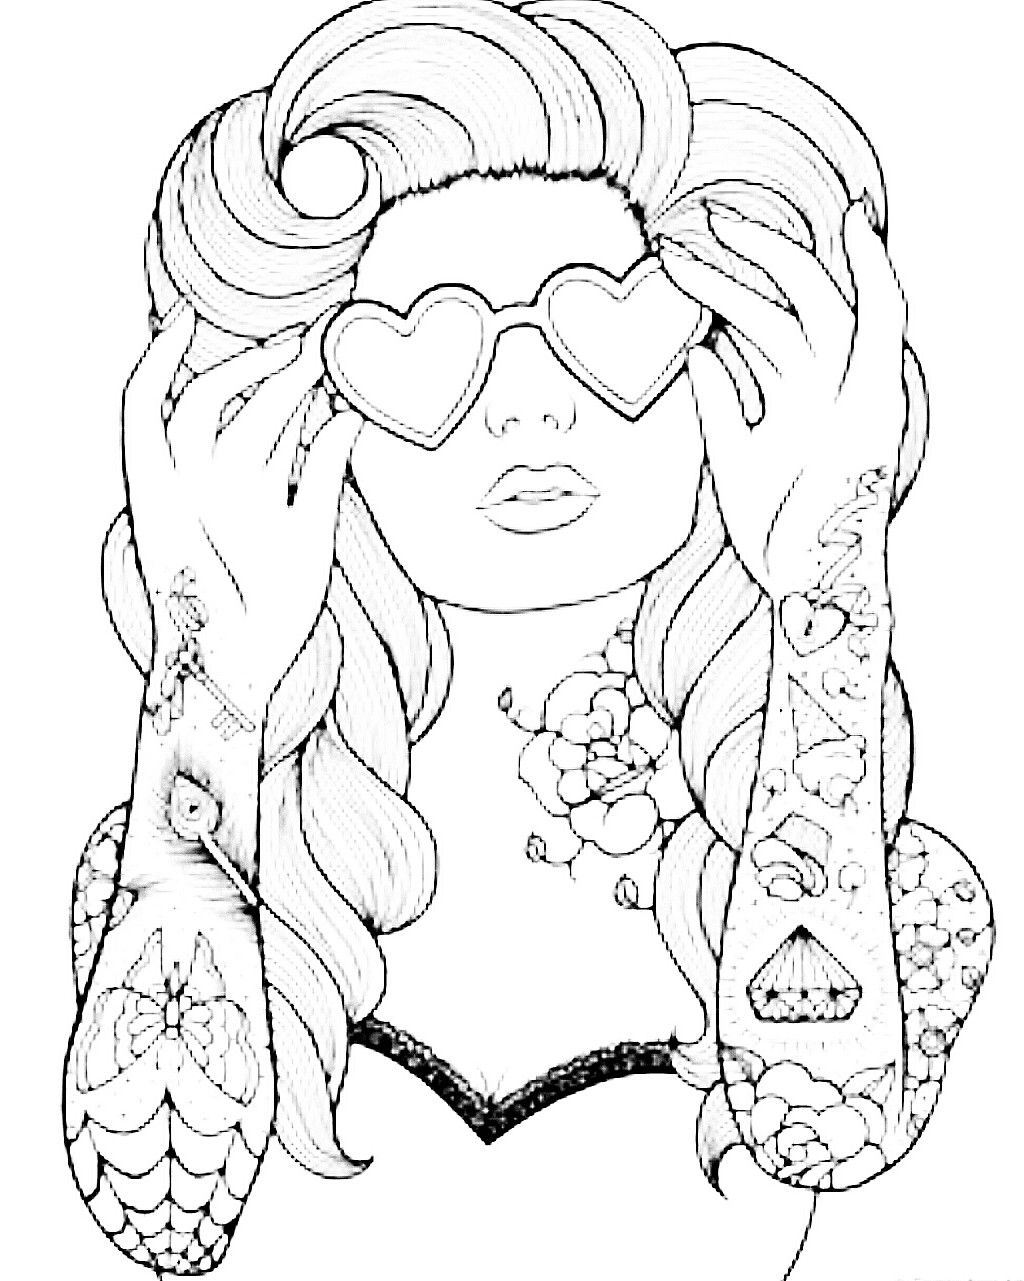 55+ Adult Coloring Pages Finished to Perfection - #7 is Stunning 23